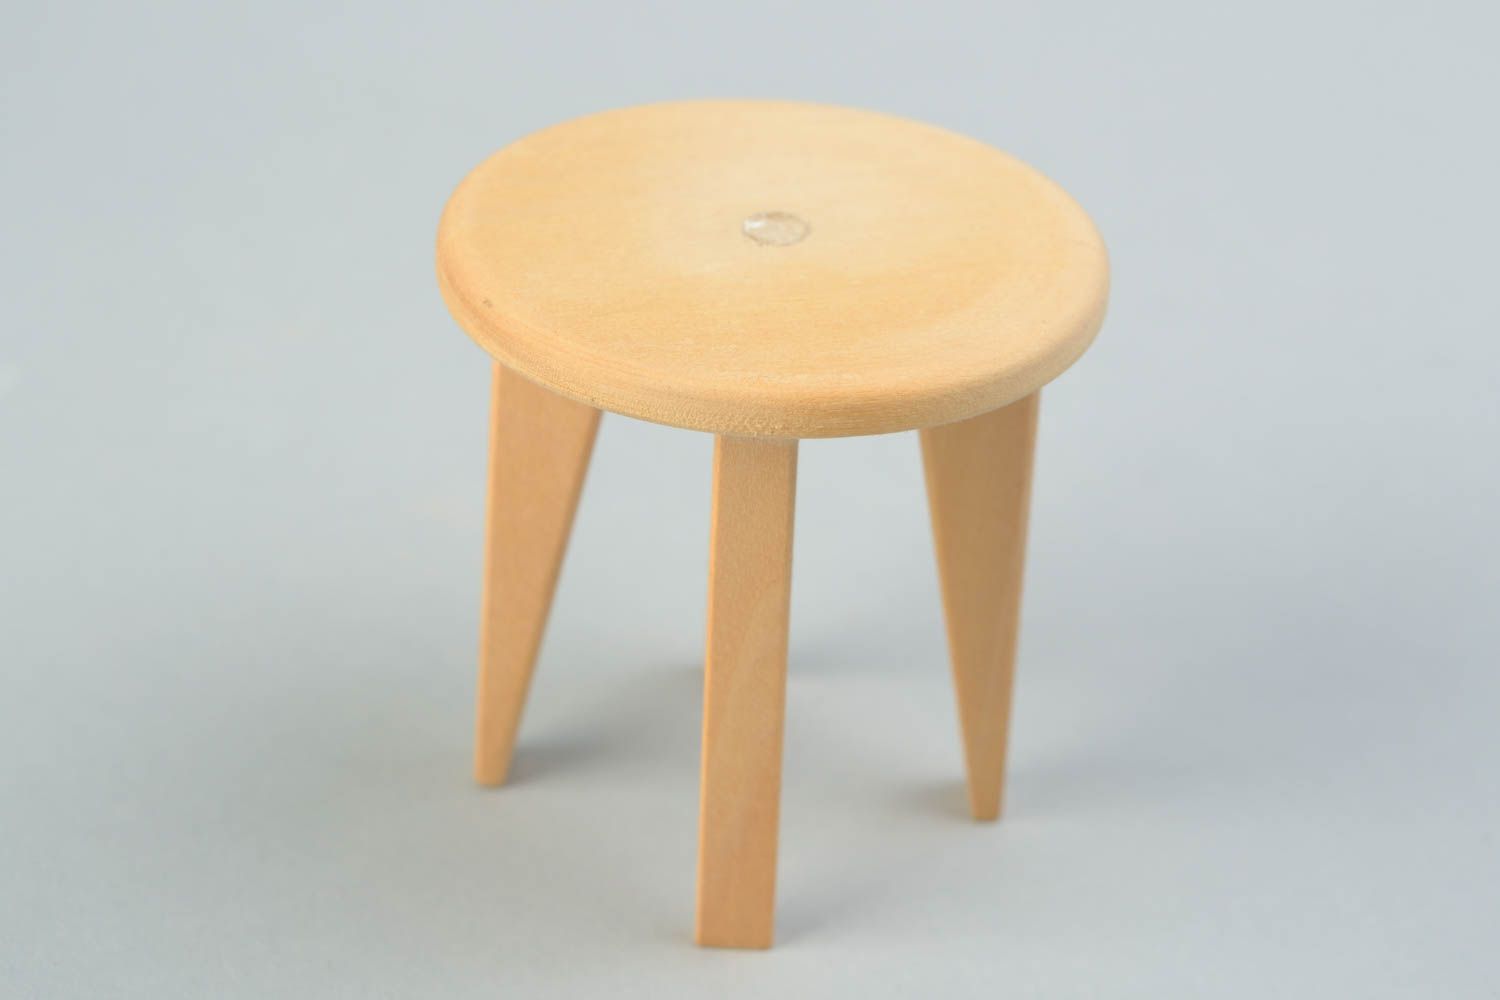 Handmade wooden blank for doll chair for painting DIY doll furniture photo 1